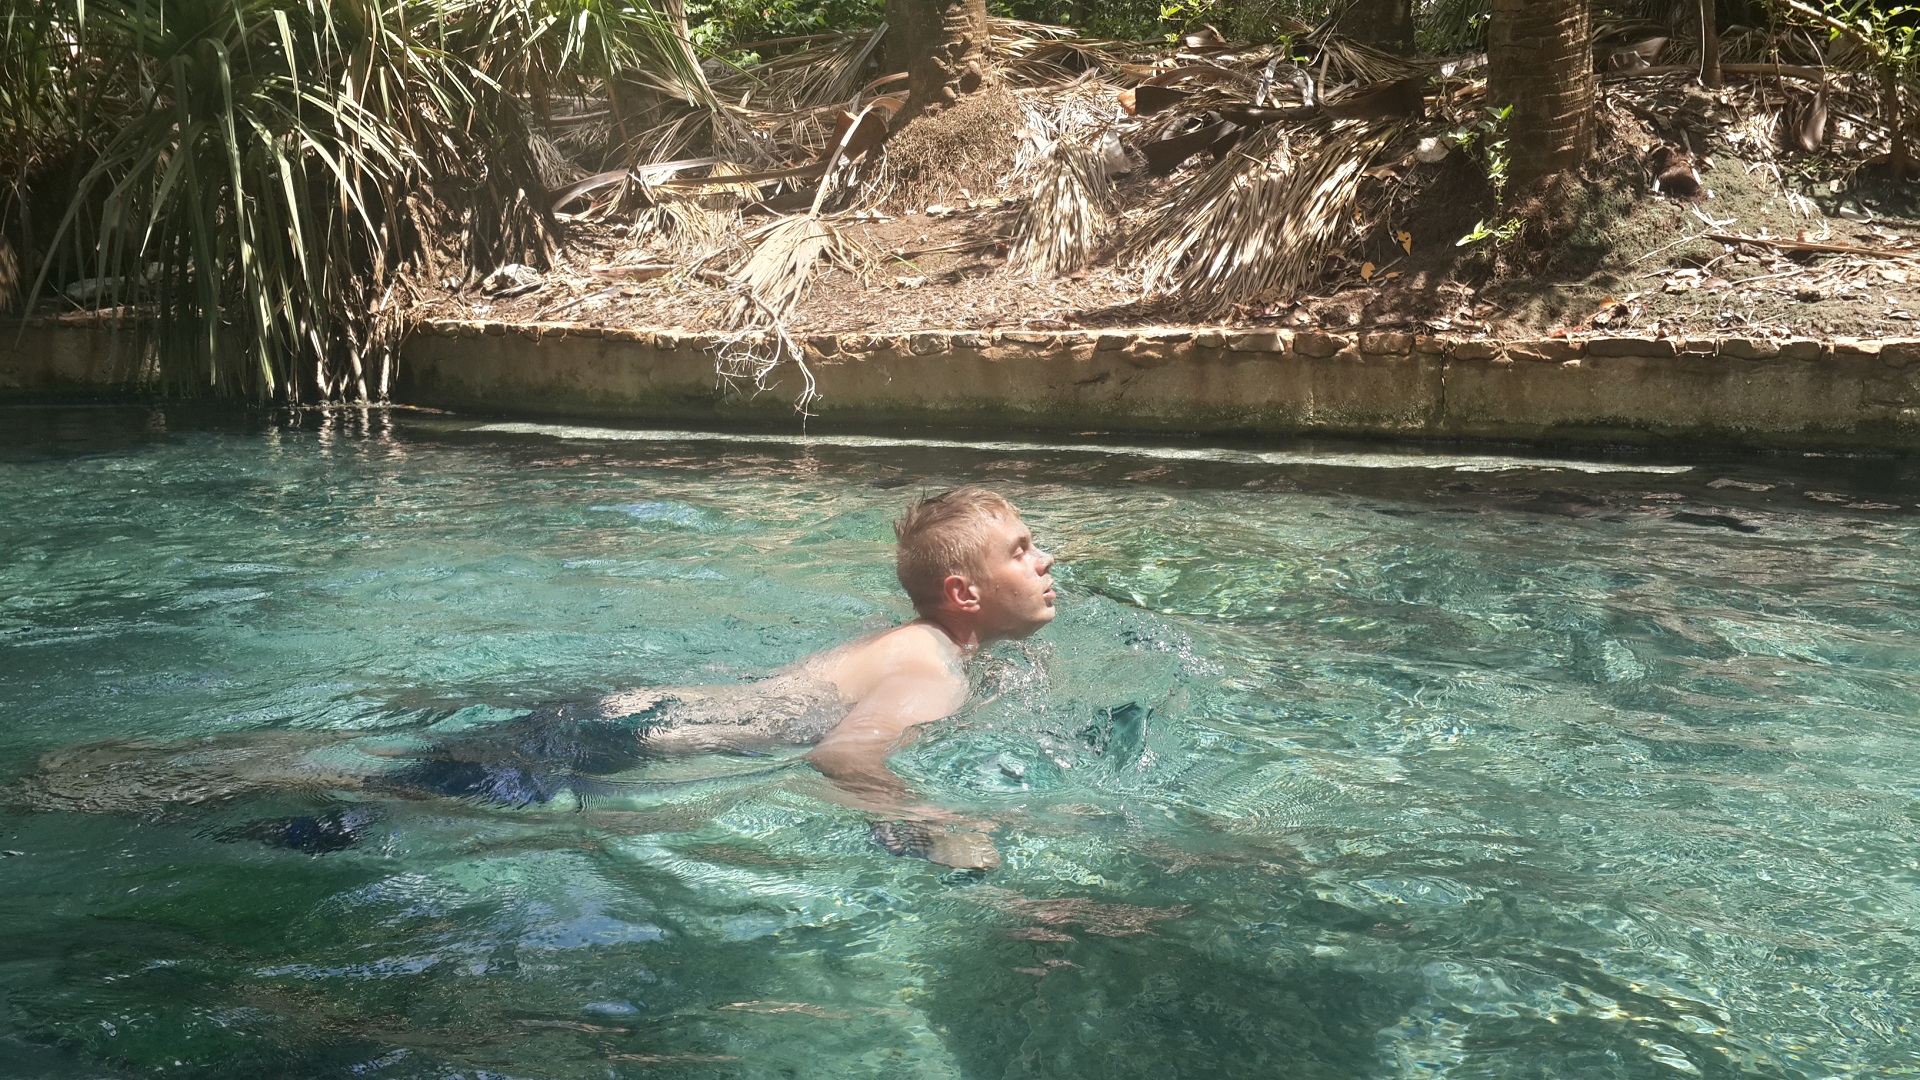 Day 9: Thermal pools in Mataranka, Australia. Crystal clear water was conducted to the pool that was partly human made.